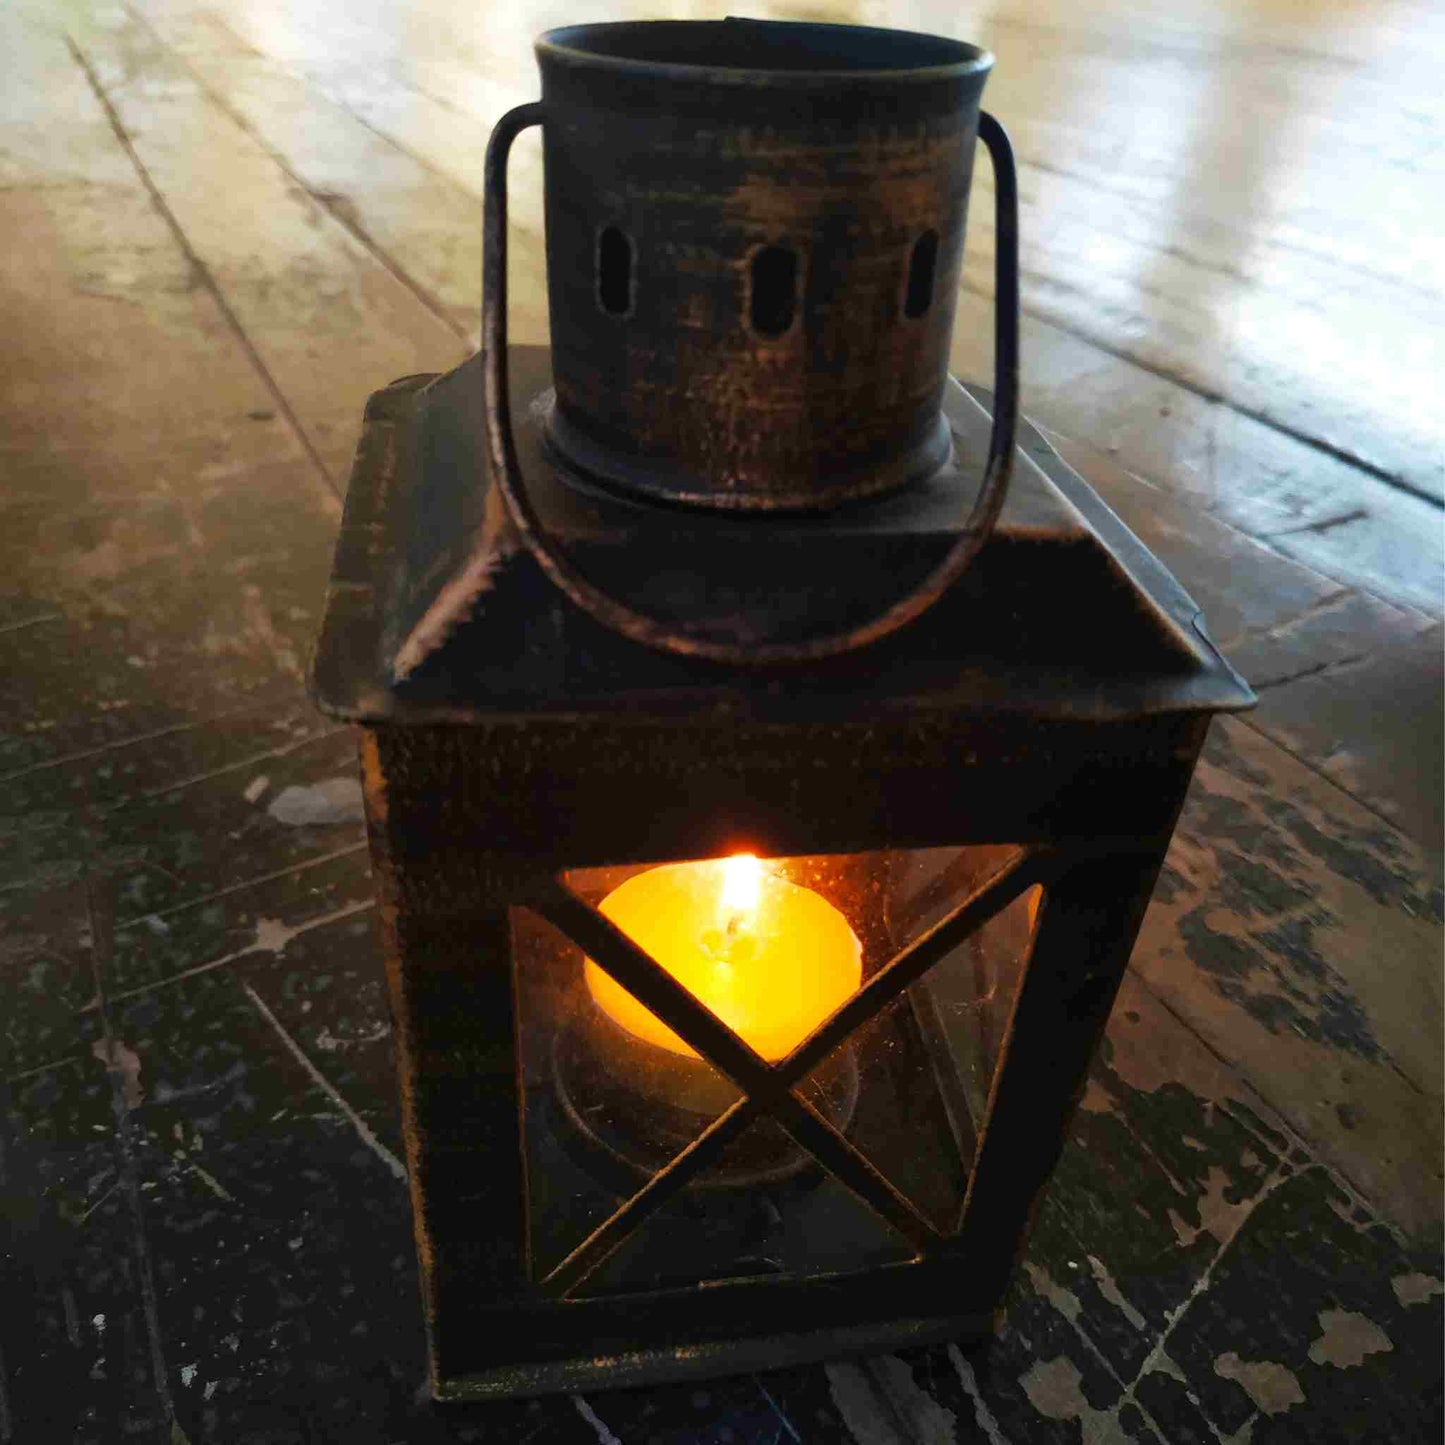 Aged metallic lantern with a flickering candlelight, casting a warm glow through its glass window, set against an antique wooden backdrop